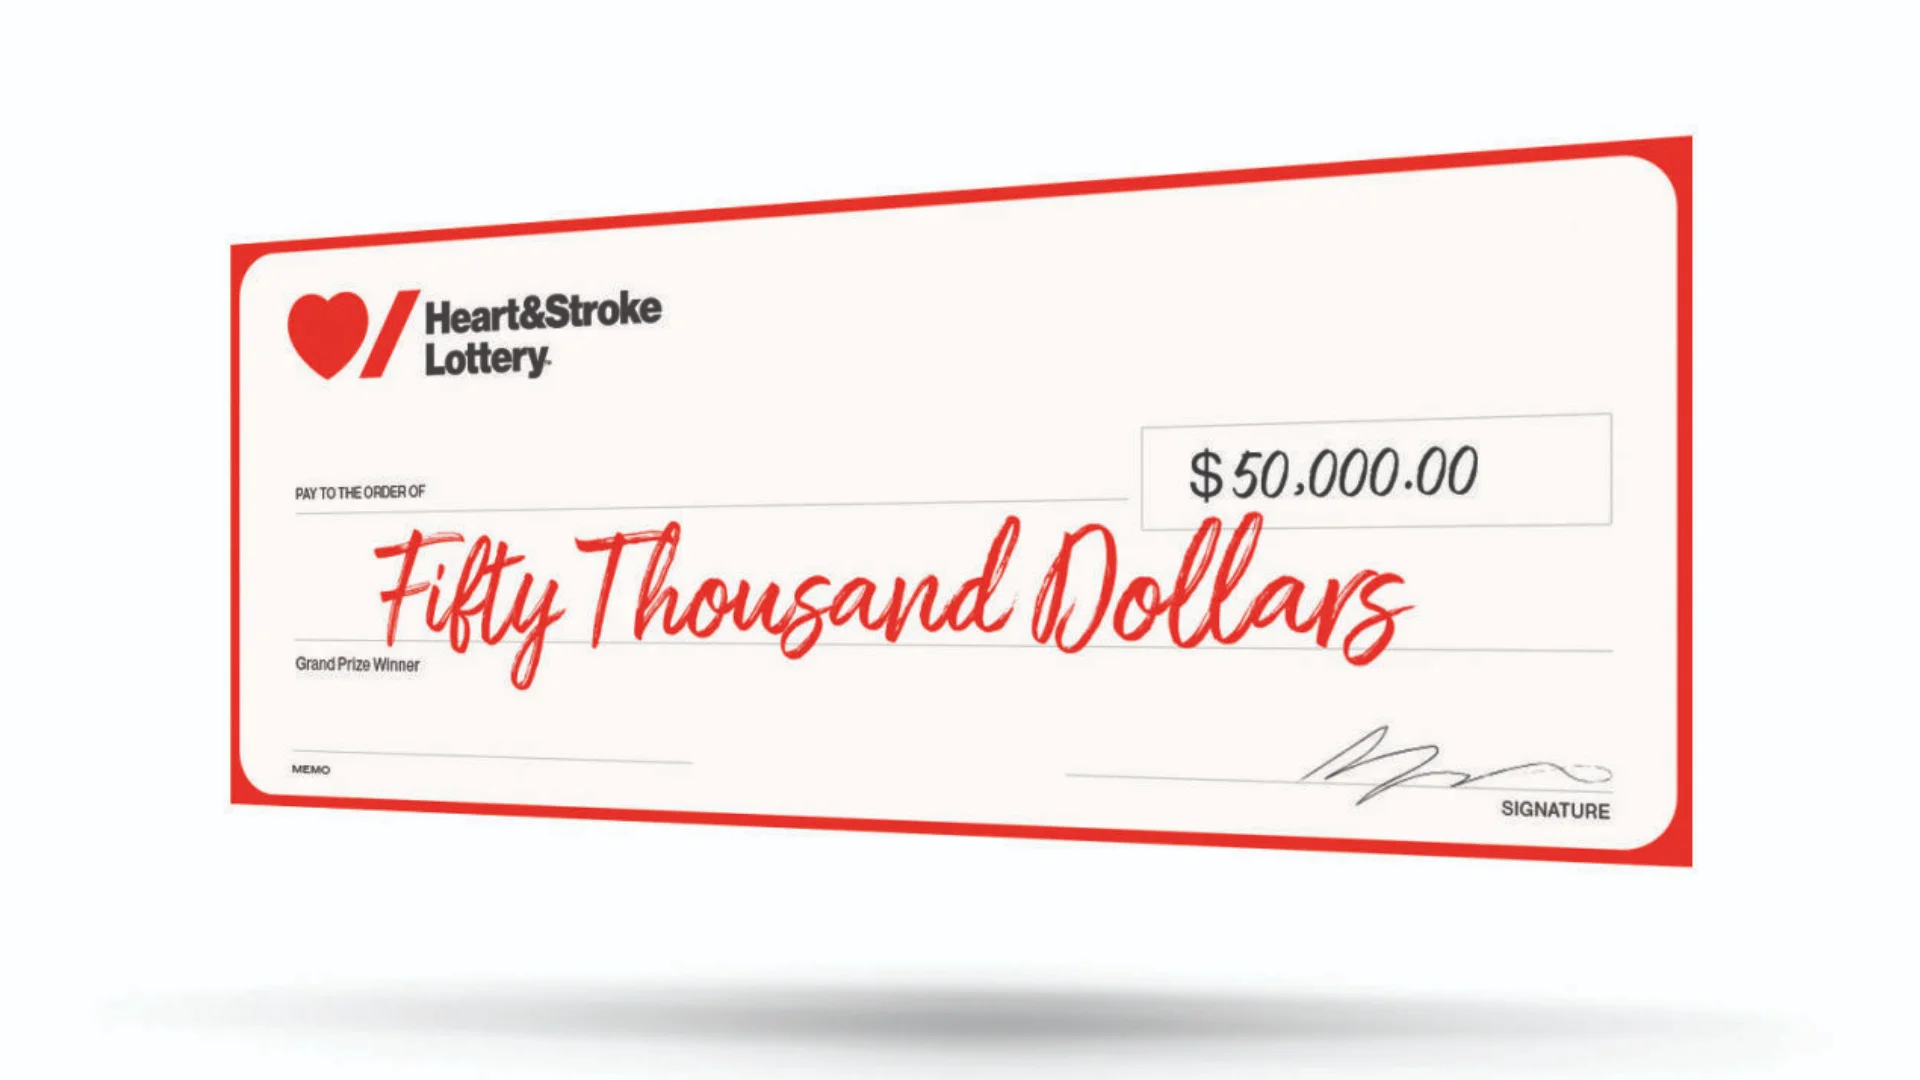 A Heart & Stroke Lottery cheque for $50,000.